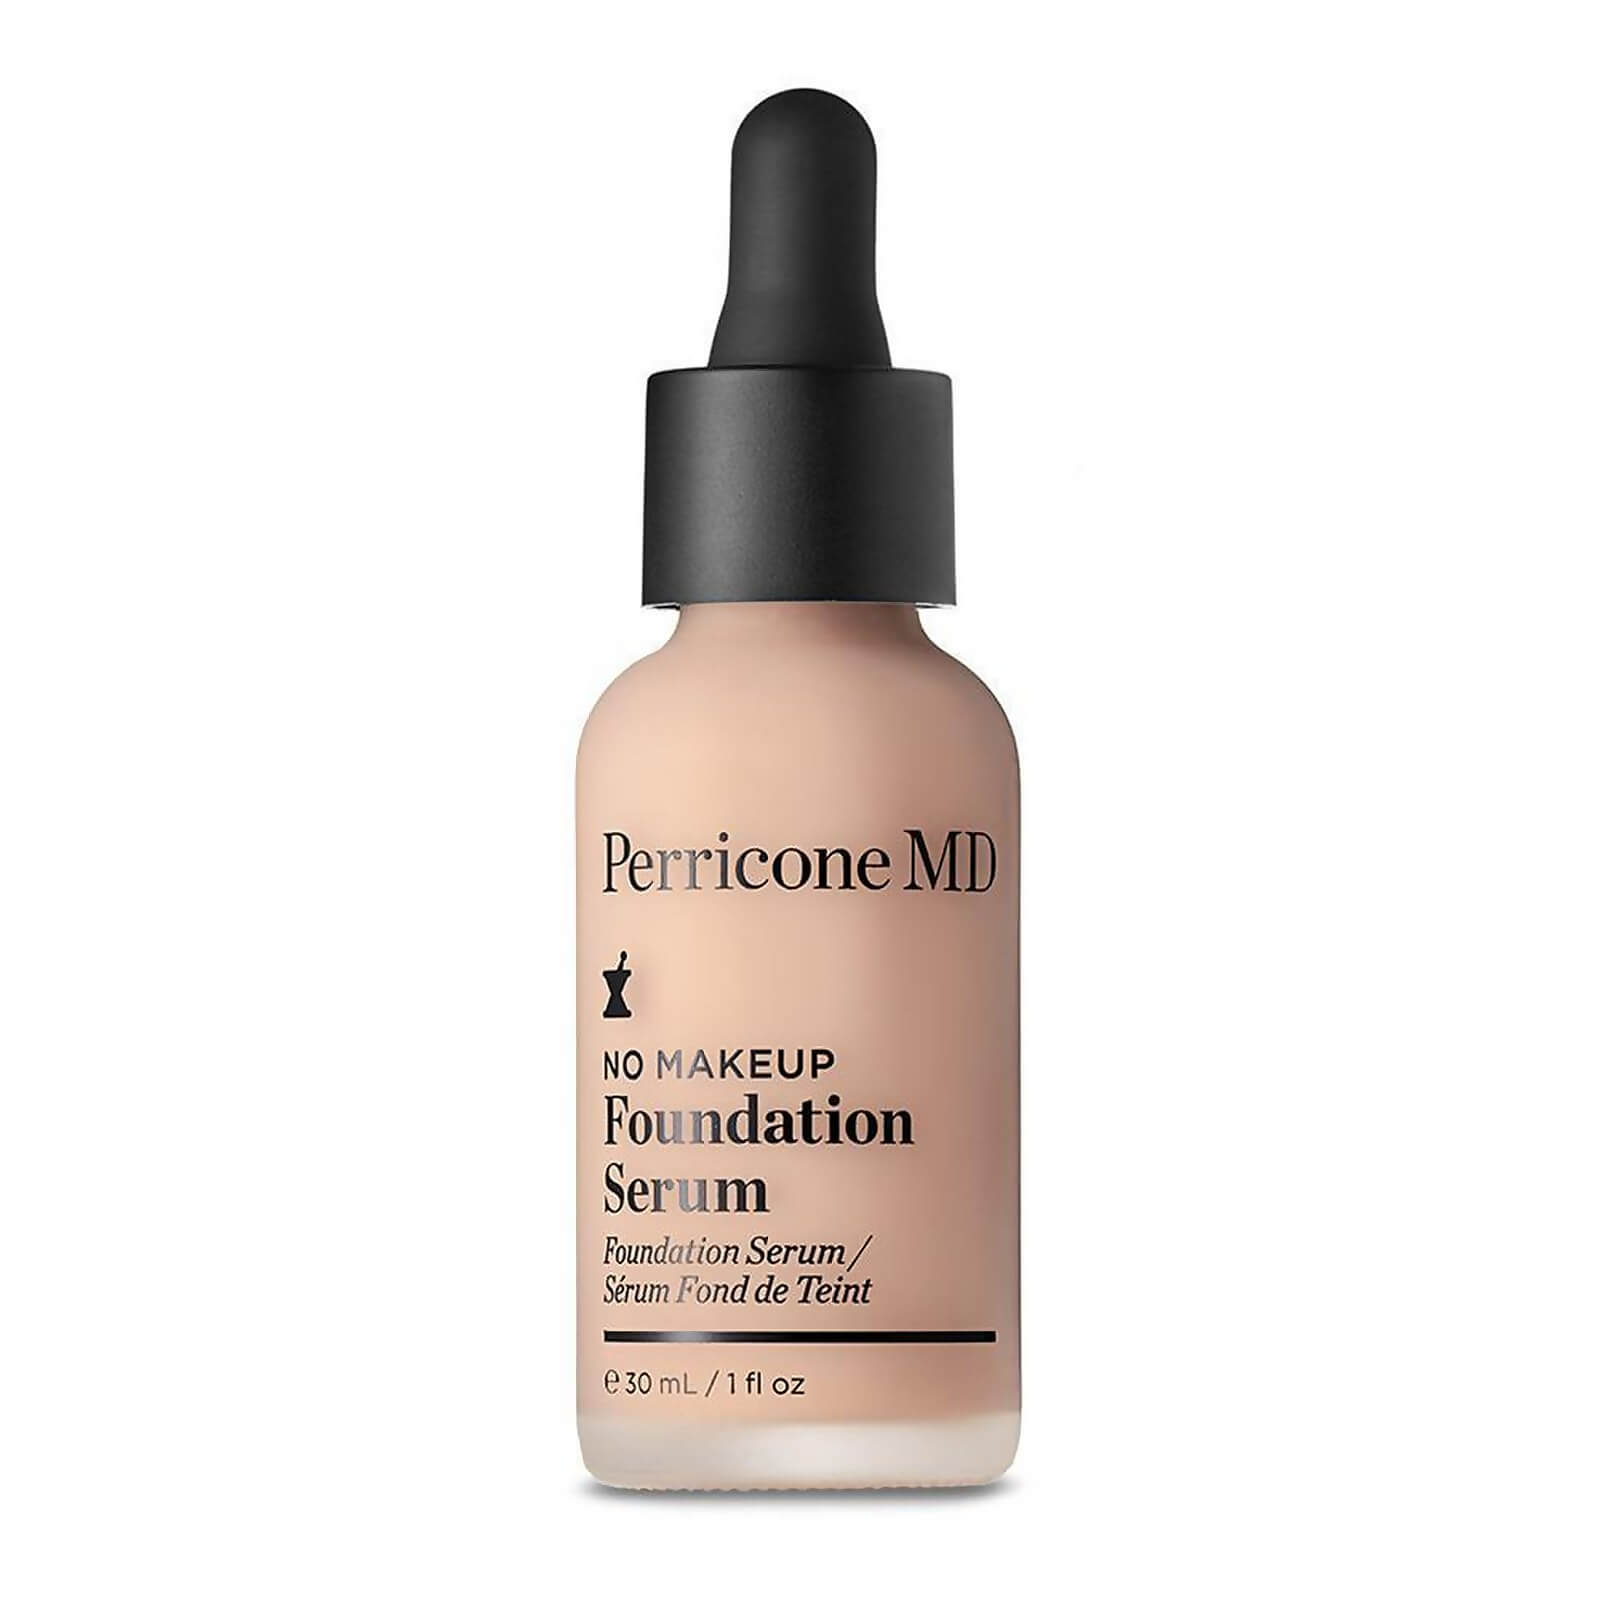 perricone md no makeup foundation serum spf 20 30ml (various shades) - 1 porcelain donna